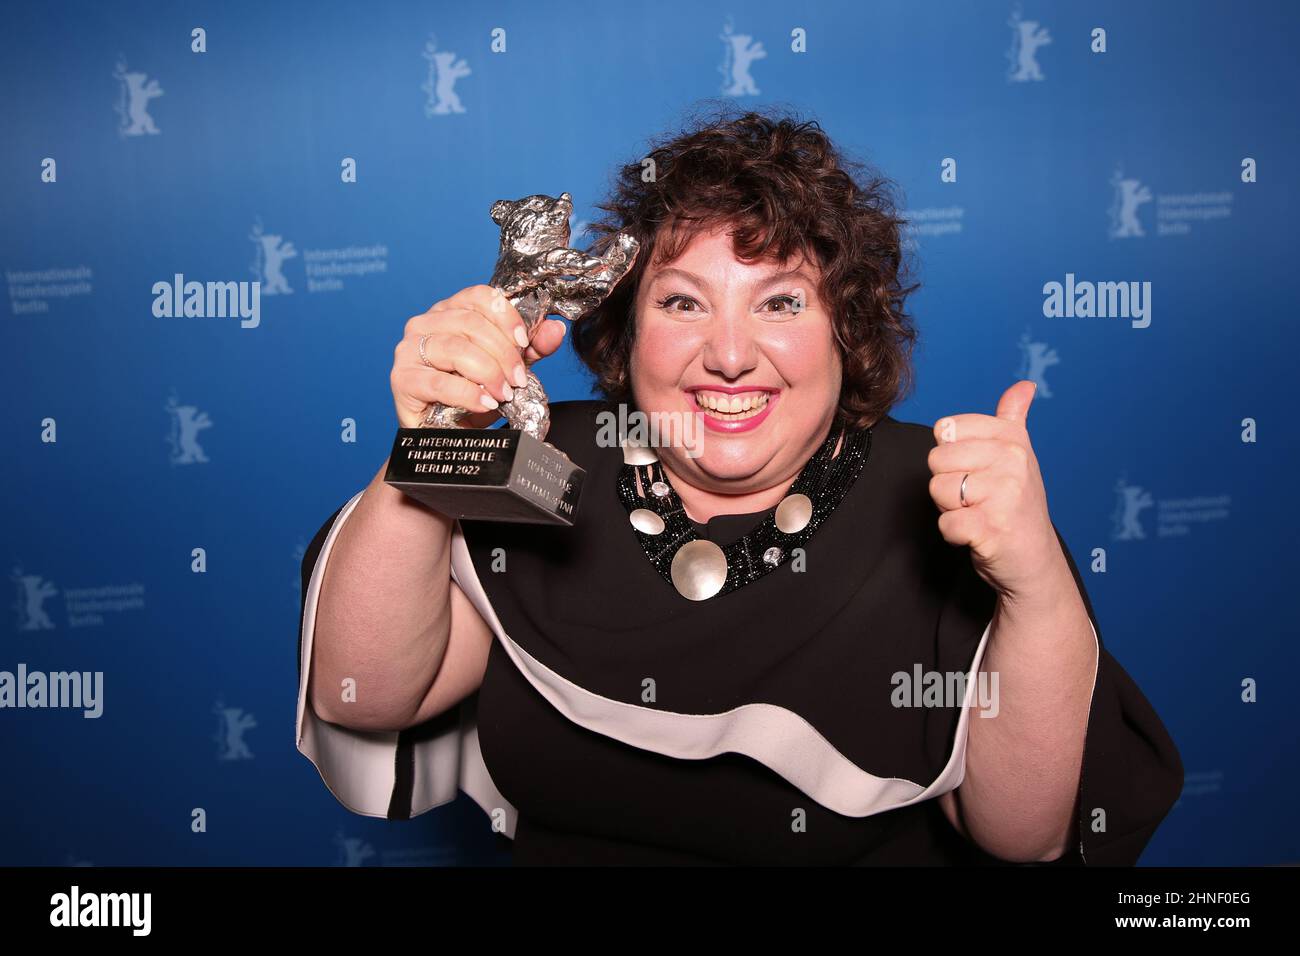 Berlin, Germany. 16th Feb, 2022. German-Turkish actress Meltem Kaptan poses with the Silver Bear for Best Actress in a Leading Role for her role in the film 'Rabiye Kurnaz vs George W Bush' during a photo session after the awards ceremony of the 72nd Berlinale Film Festival. Credit: Ronny Hartmann/AFP POOL/dpa/Alamy Live News Stock Photo